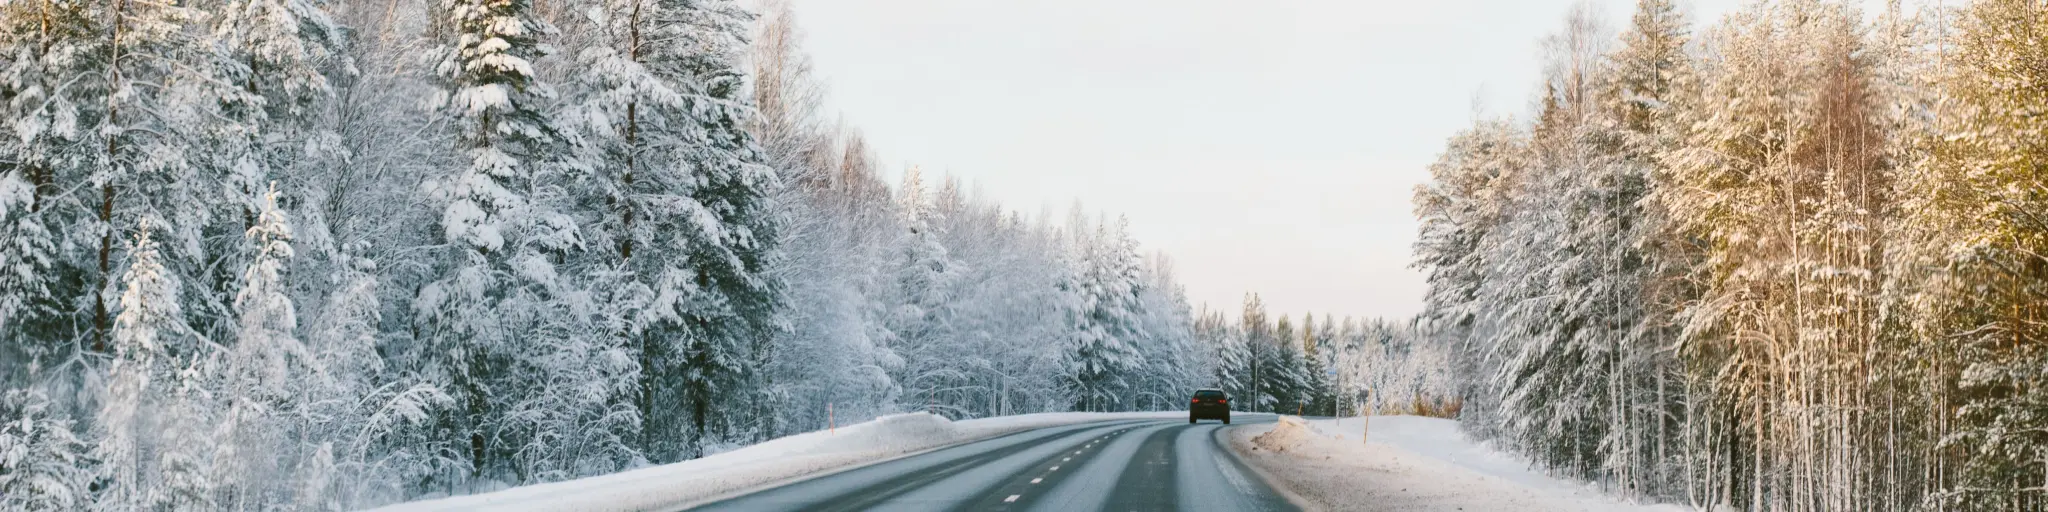 A car driving down the right side of a road surrounded by snowy trees